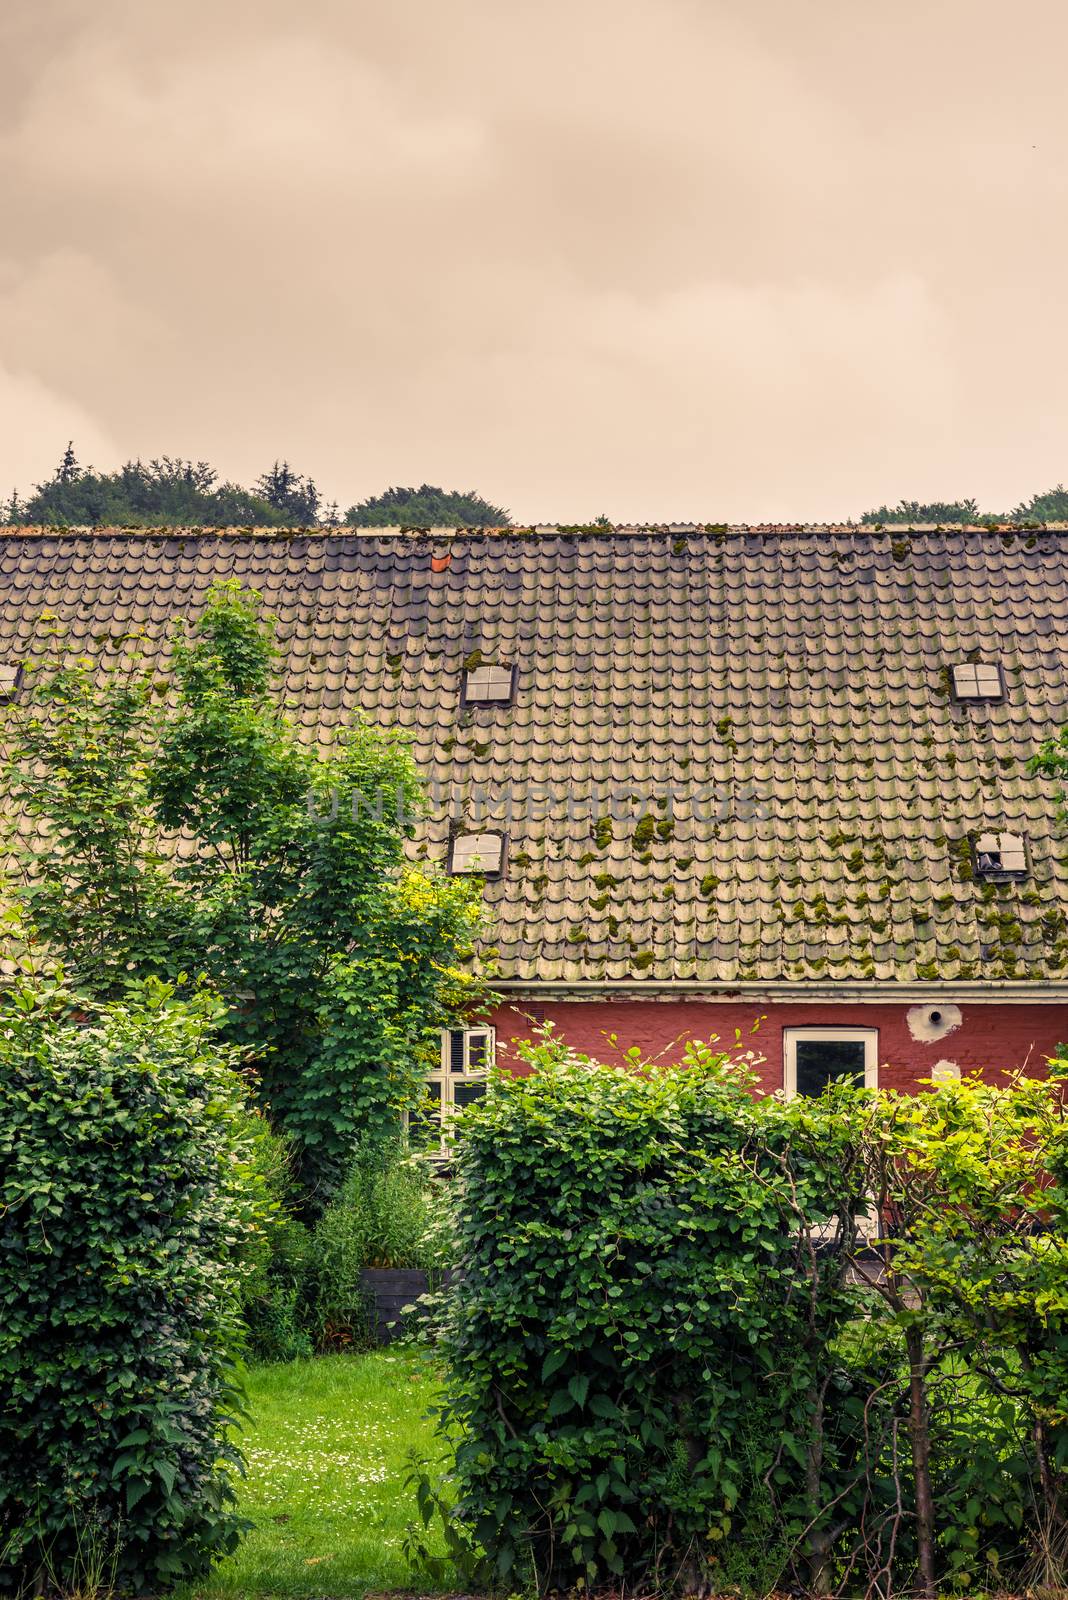 Hedge at an old house by Sportactive